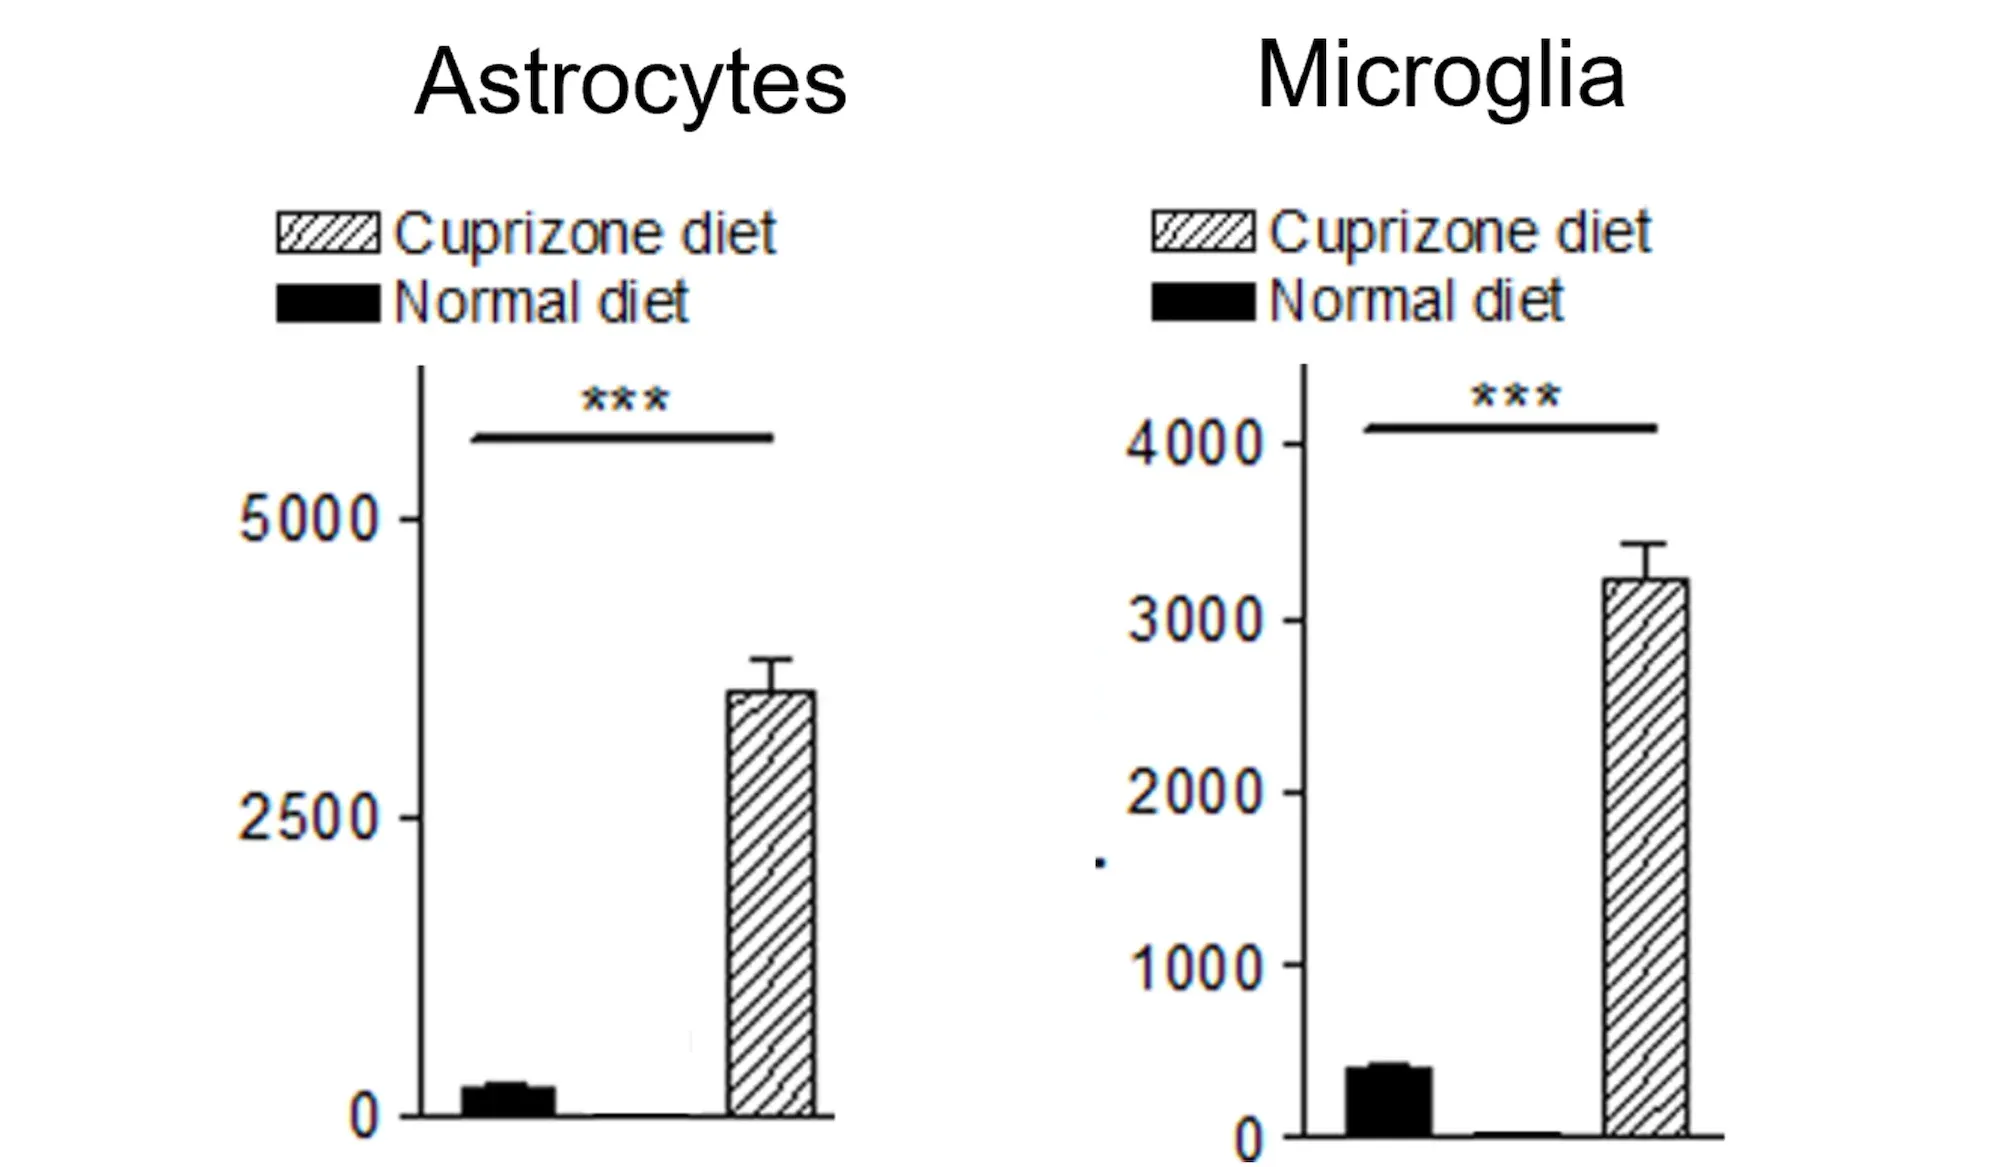 Two bar graphs indicating that a cuprizone diet significantly increases the activity or quantity of astrocytes and microglia compared to a normal diet, relevant in the study of demyelination in Multiple Sclerosis models